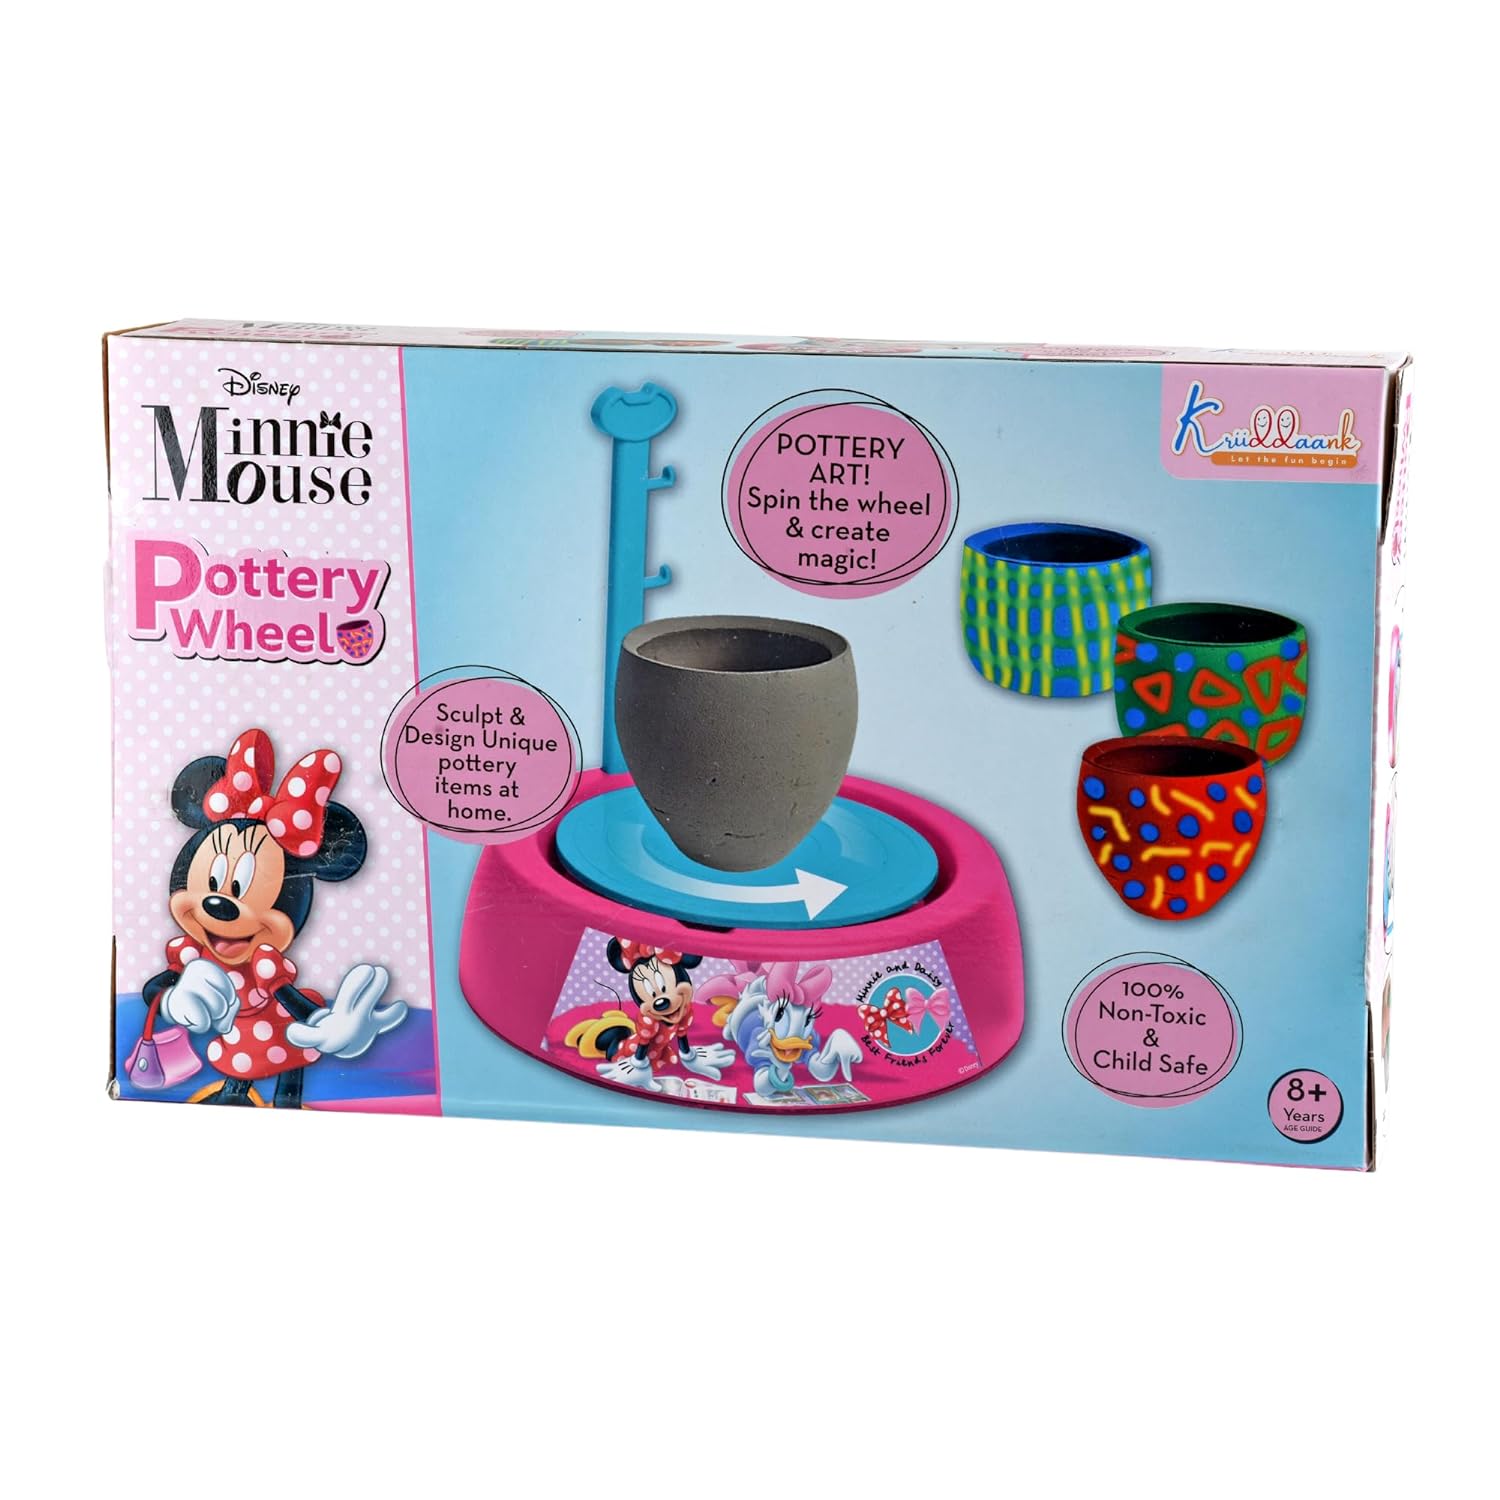 Disney Minnie Mouse Pottery Wheel Battery Operated with Molding Clay & Painting Kit Learning and Education Multicolor Board Game Toys for Kids (Pink)